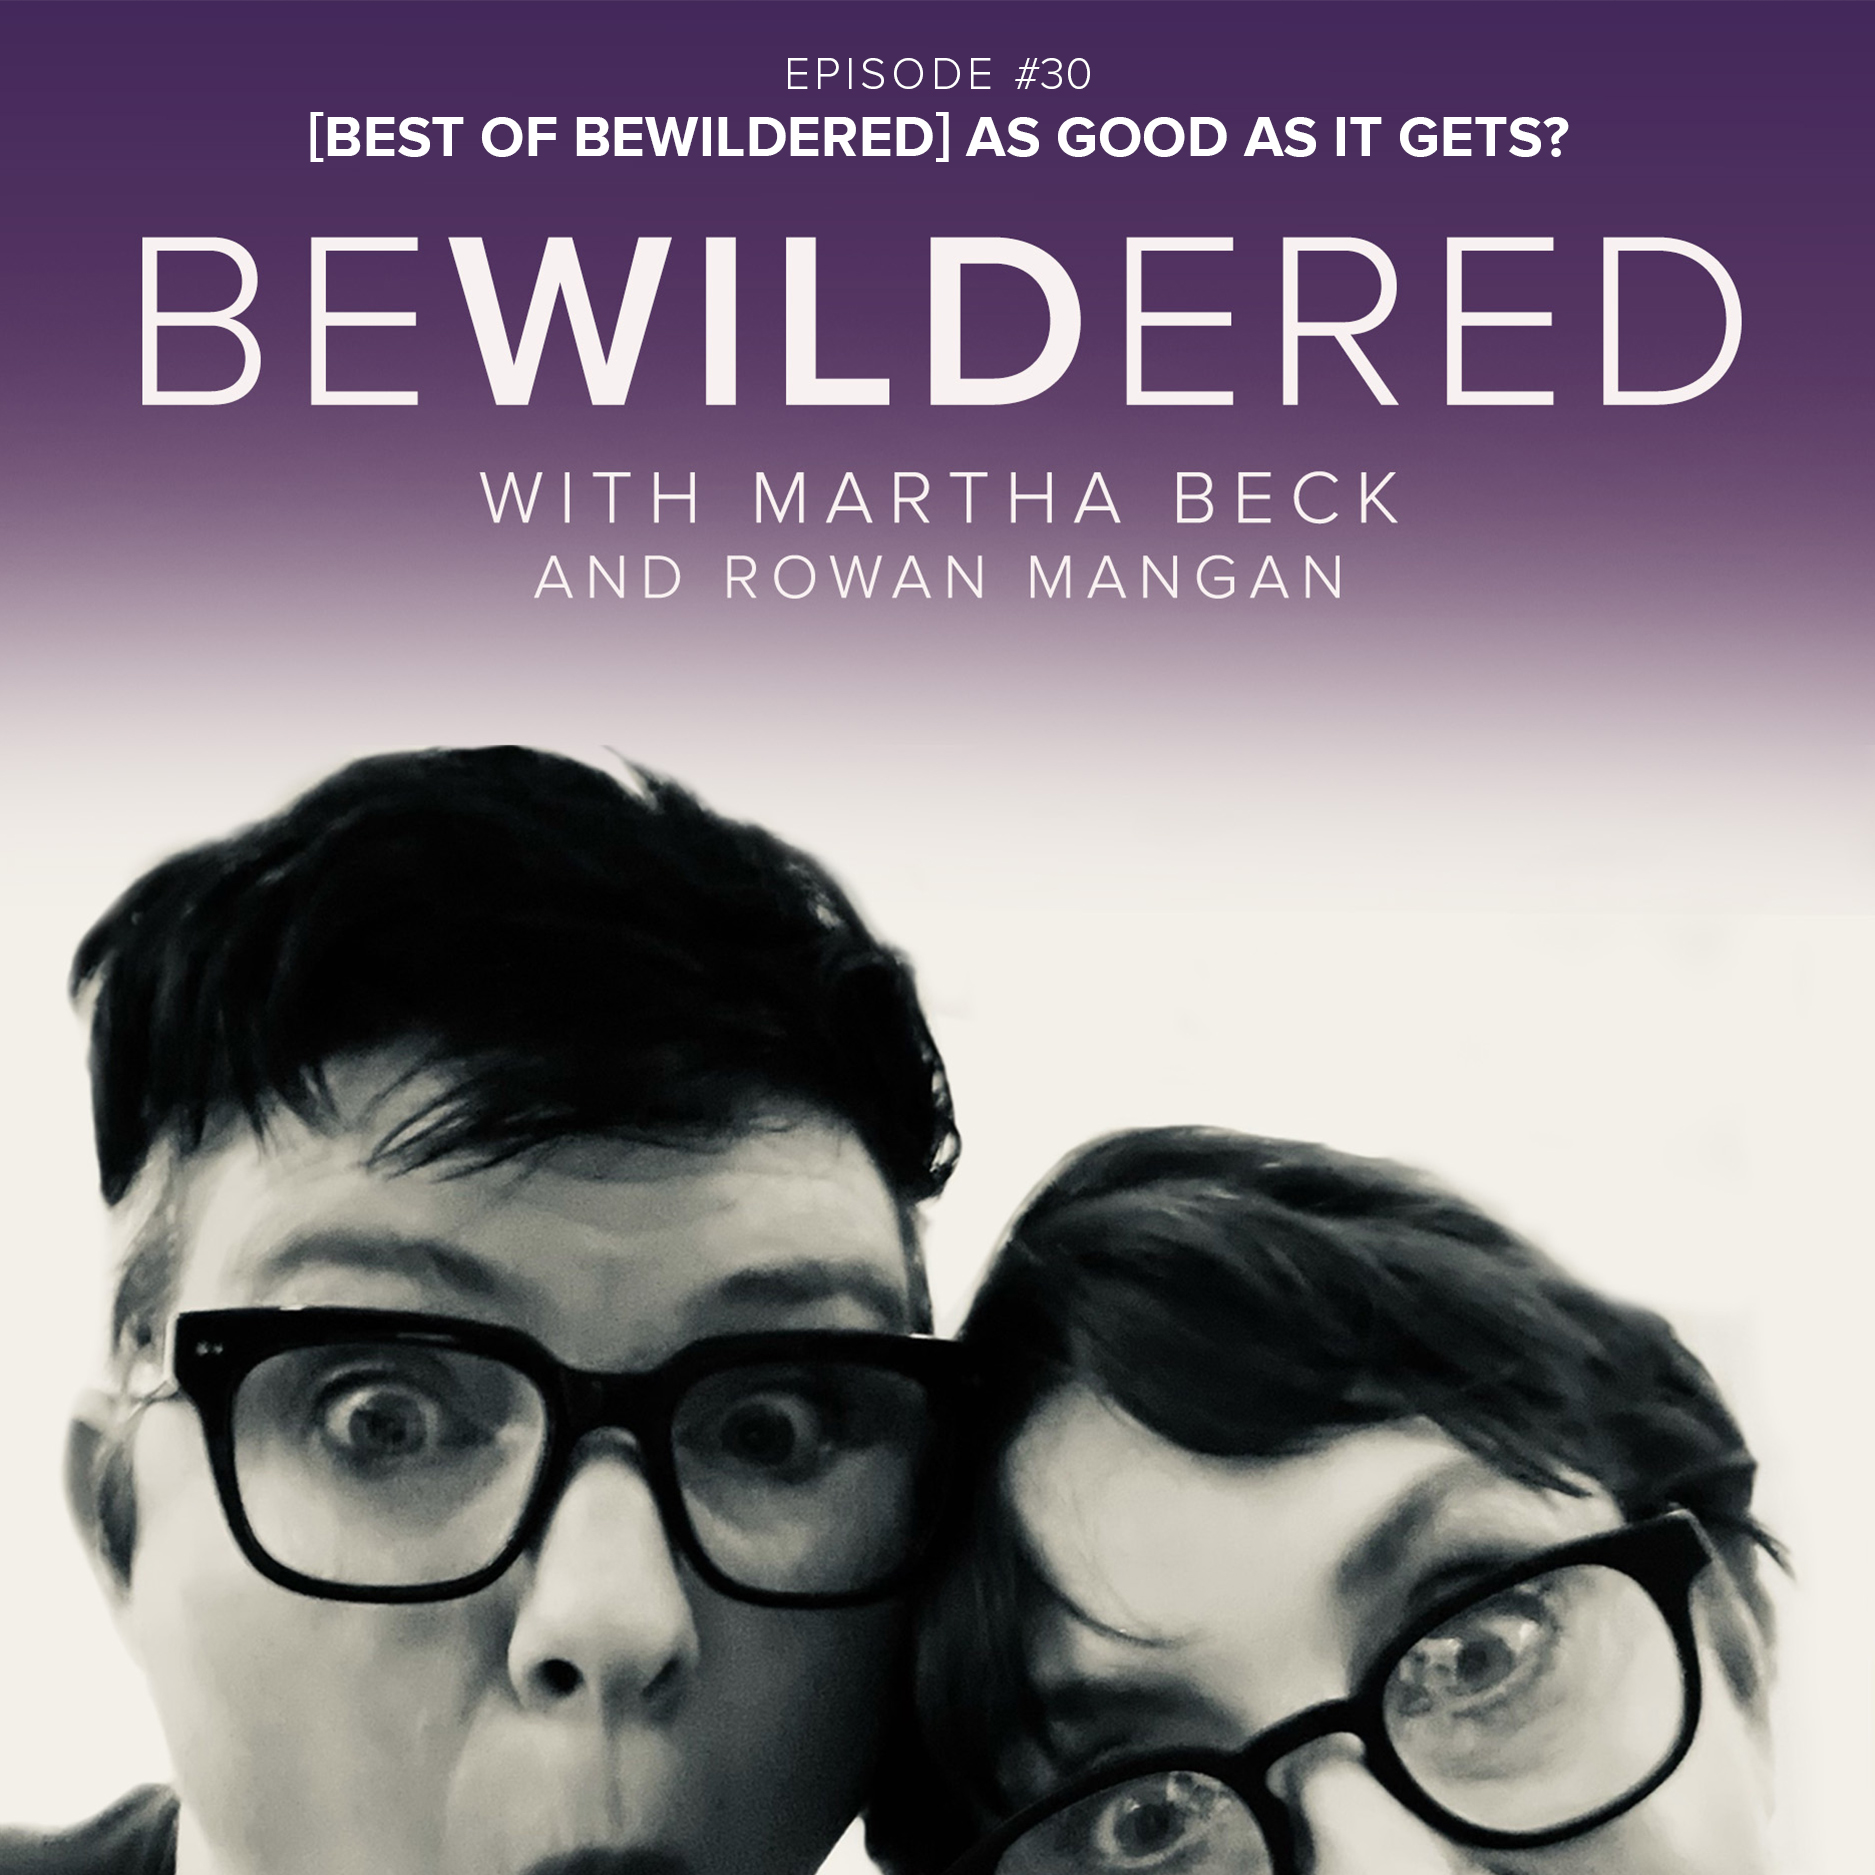 Image for Episode #30 [Best of Bewildered] As Good As It Gets? for the Bewildered Podcast with Martha Beck and Rowan Mangan